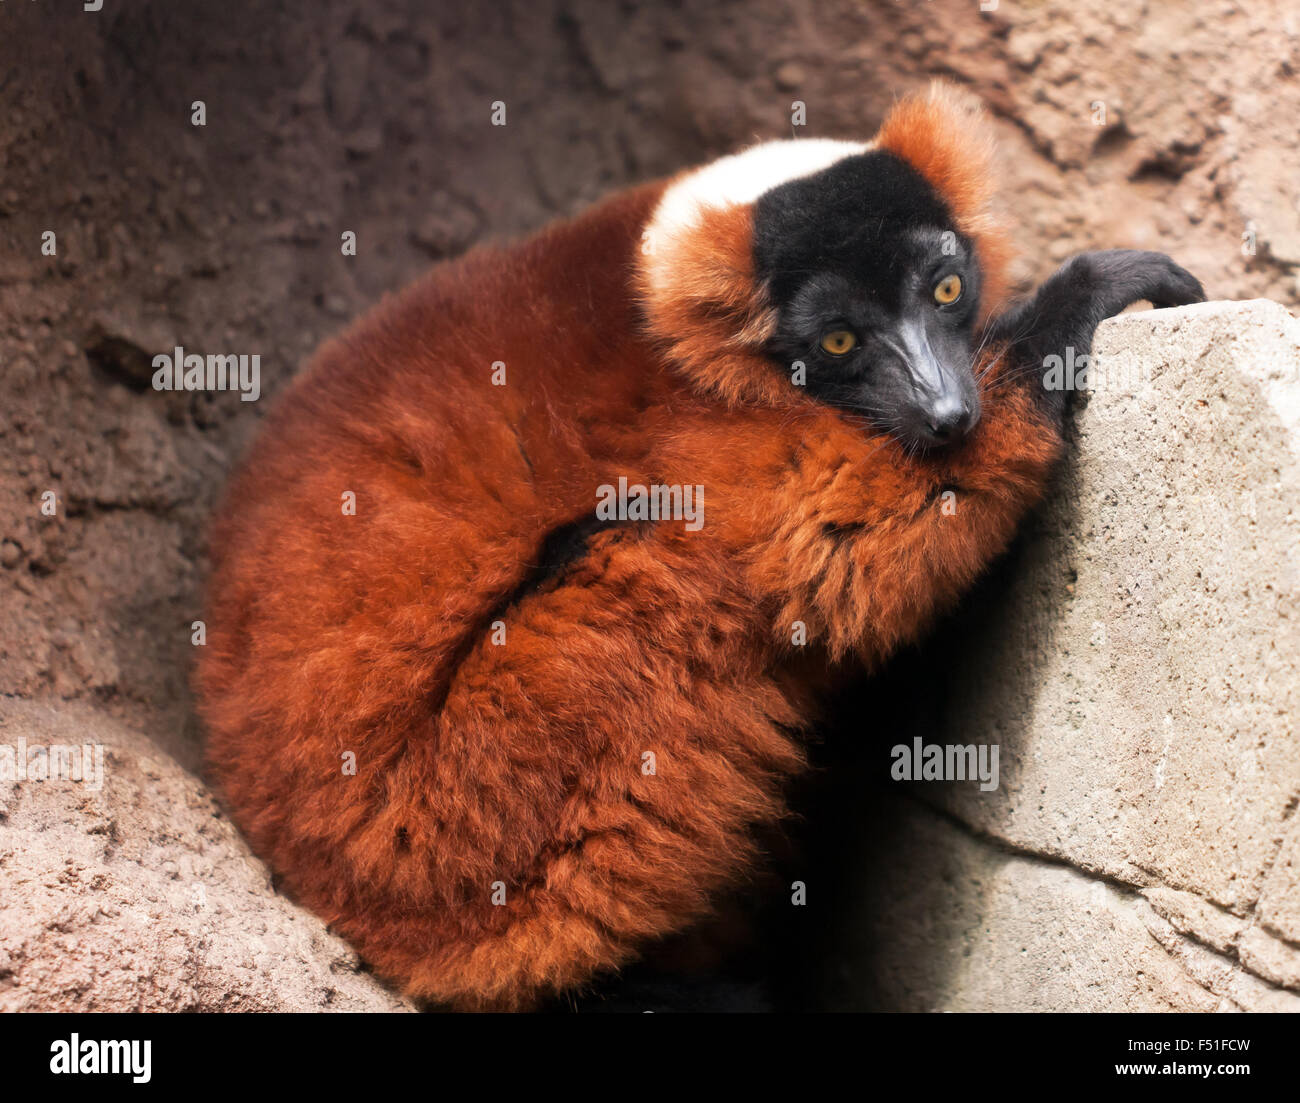 Close-up of a red ruffed lemur (Varecia rubra), in its enclosure at the Rare Species Conservation Centre, Sandwich. Stock Photo